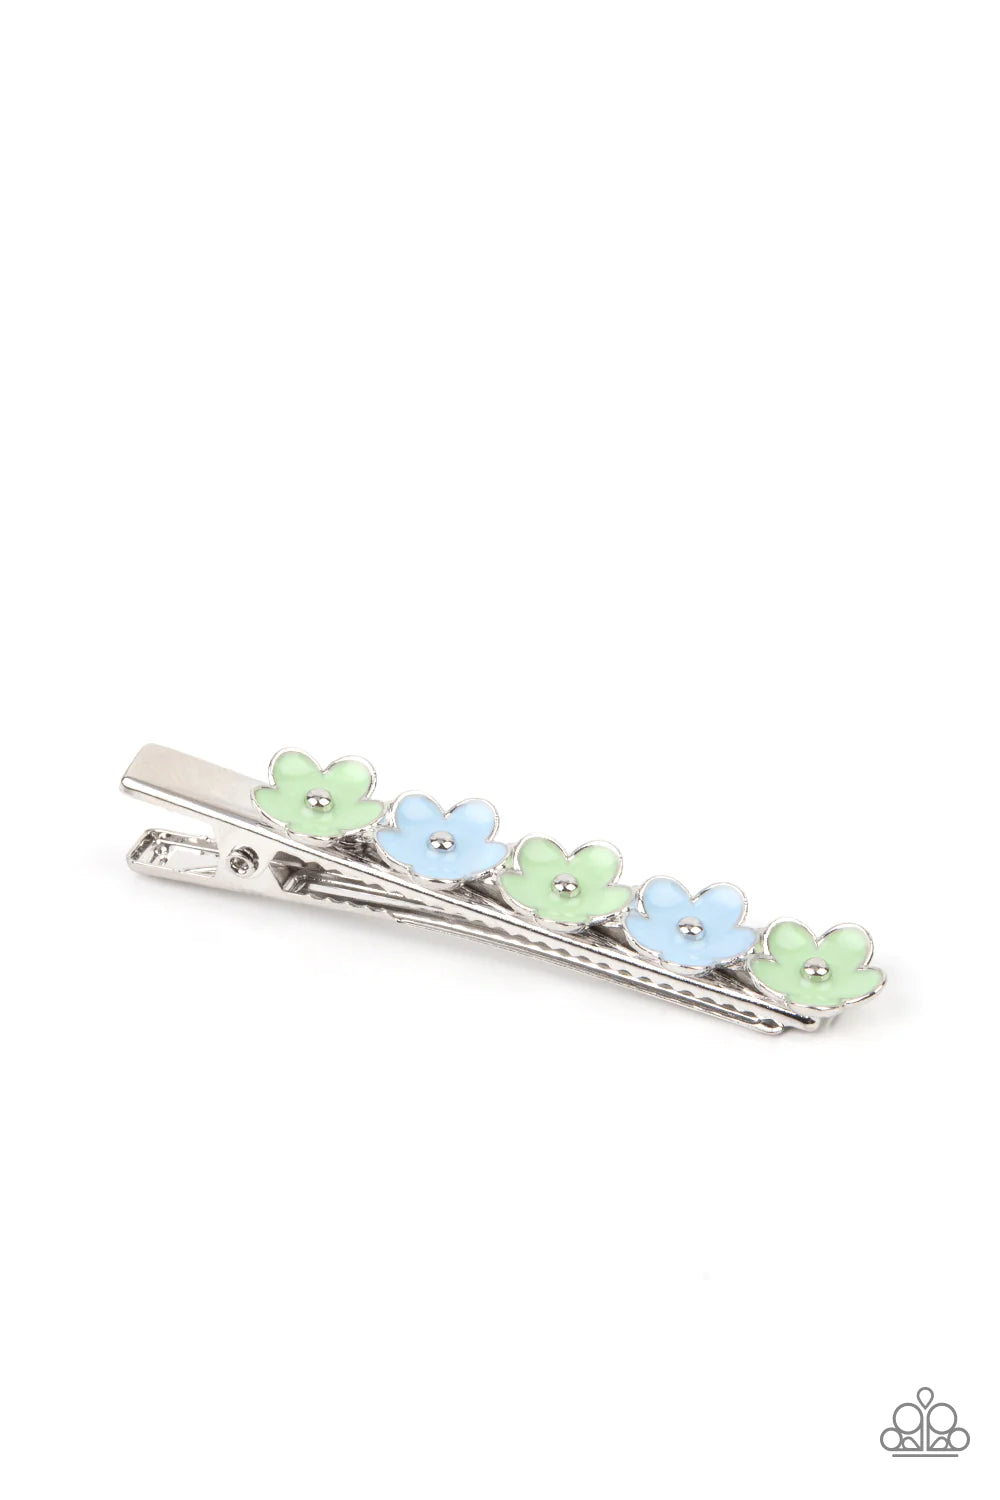 Paparazzi Accessories Flower Patch Flirt - Multi Dotted with silver studded centers, dainty green and blue flowers bloom across the front of a dainty classic silver hair clip for a whimsy garden inspiration. Sold as one individual hair clip. Hair Accessor